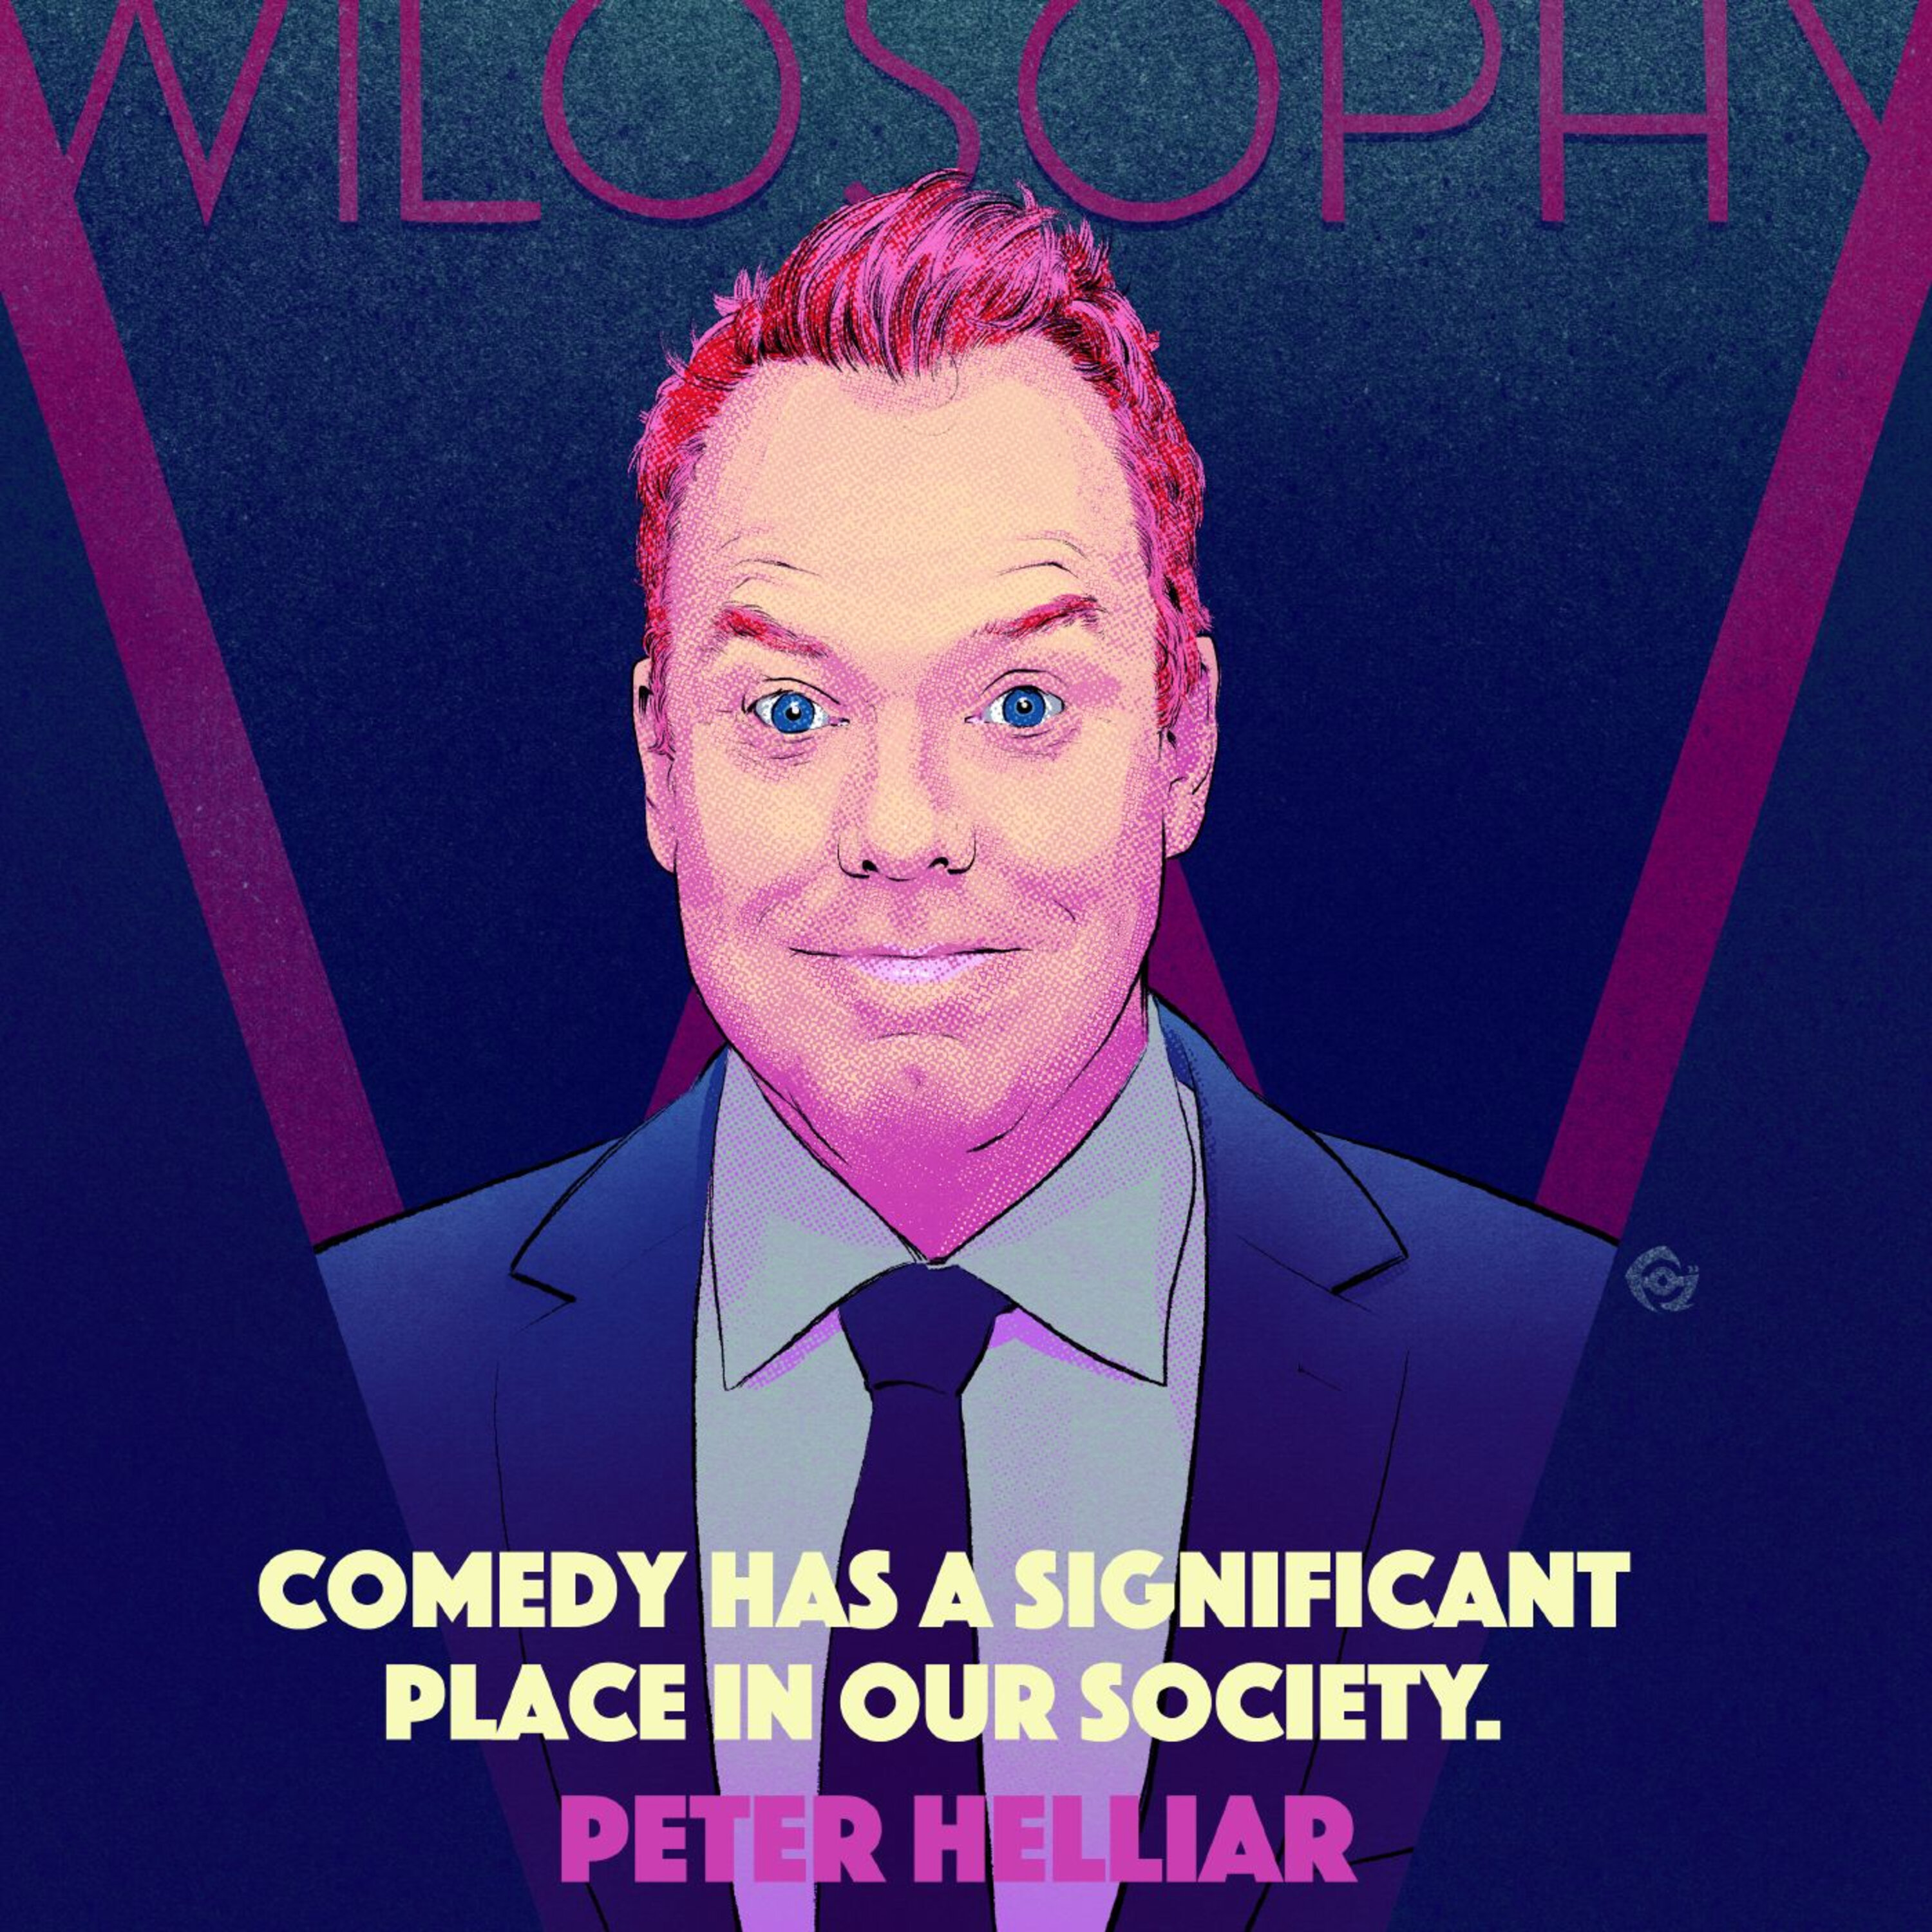 WILOSOPHY with Peter Helliar (Part 2)